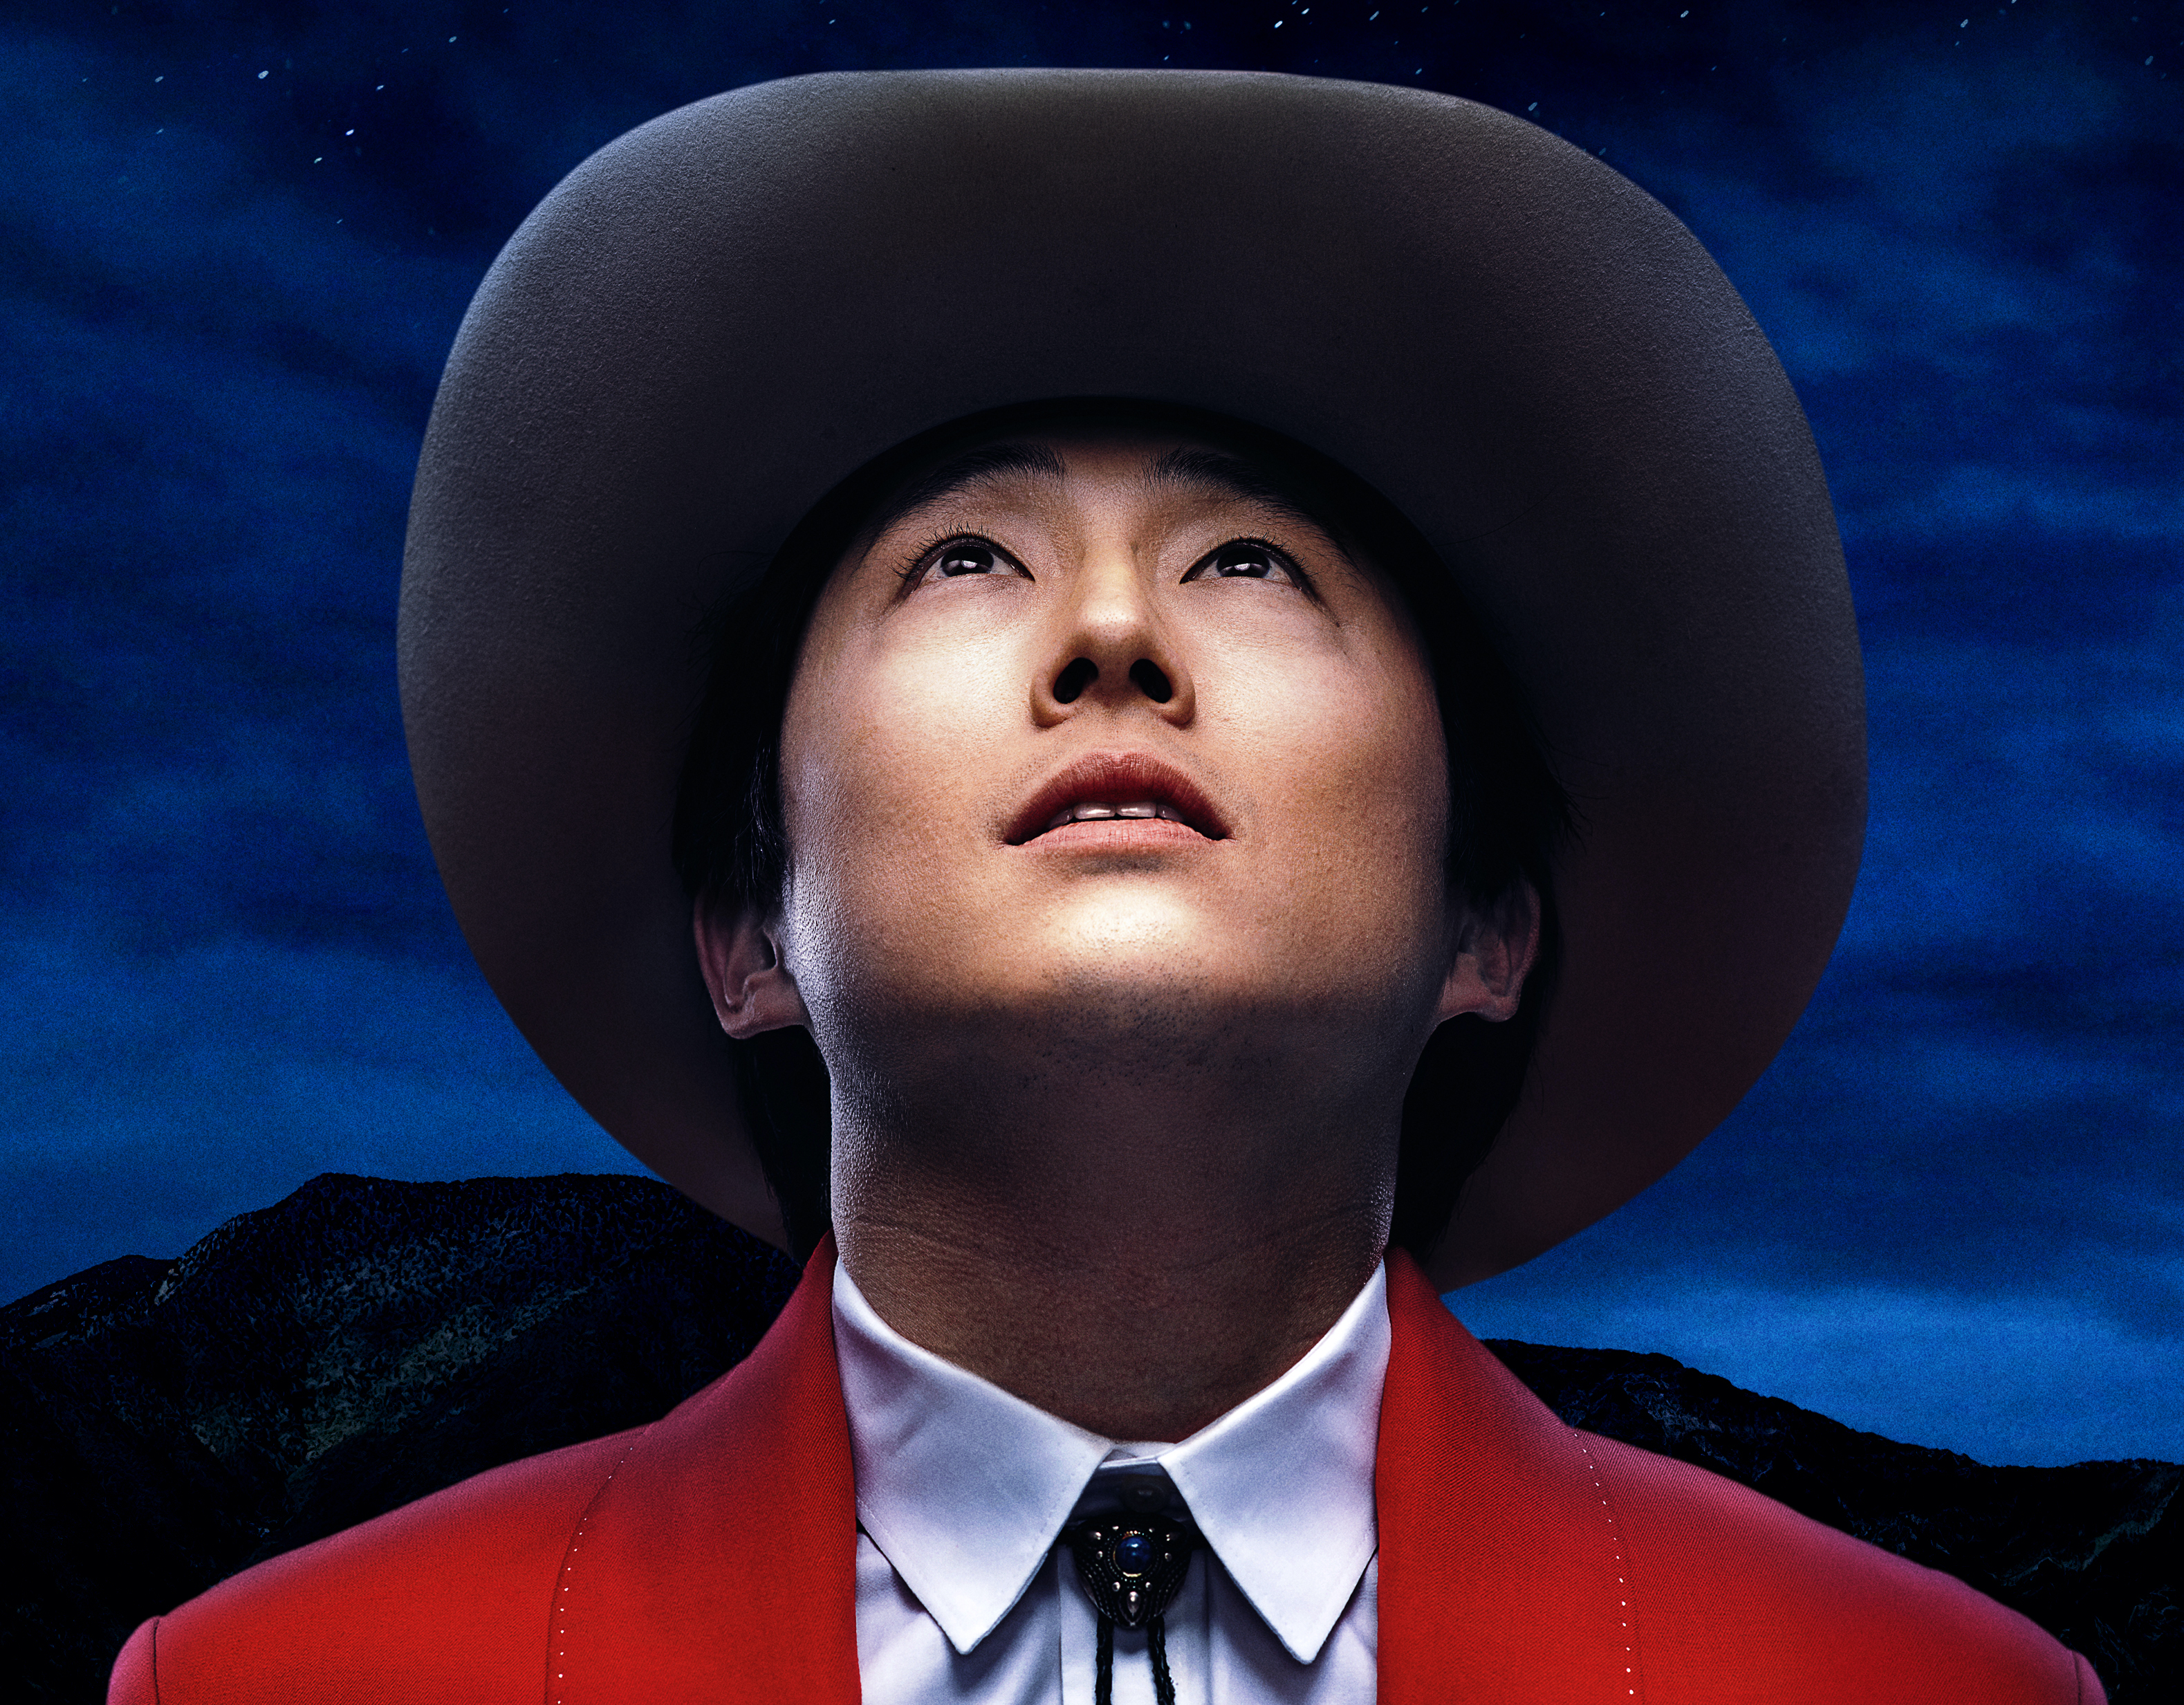 A poster image for Nope, with Steven Yuen as Ricky "Jupe" Park looking up at the sky in wonder